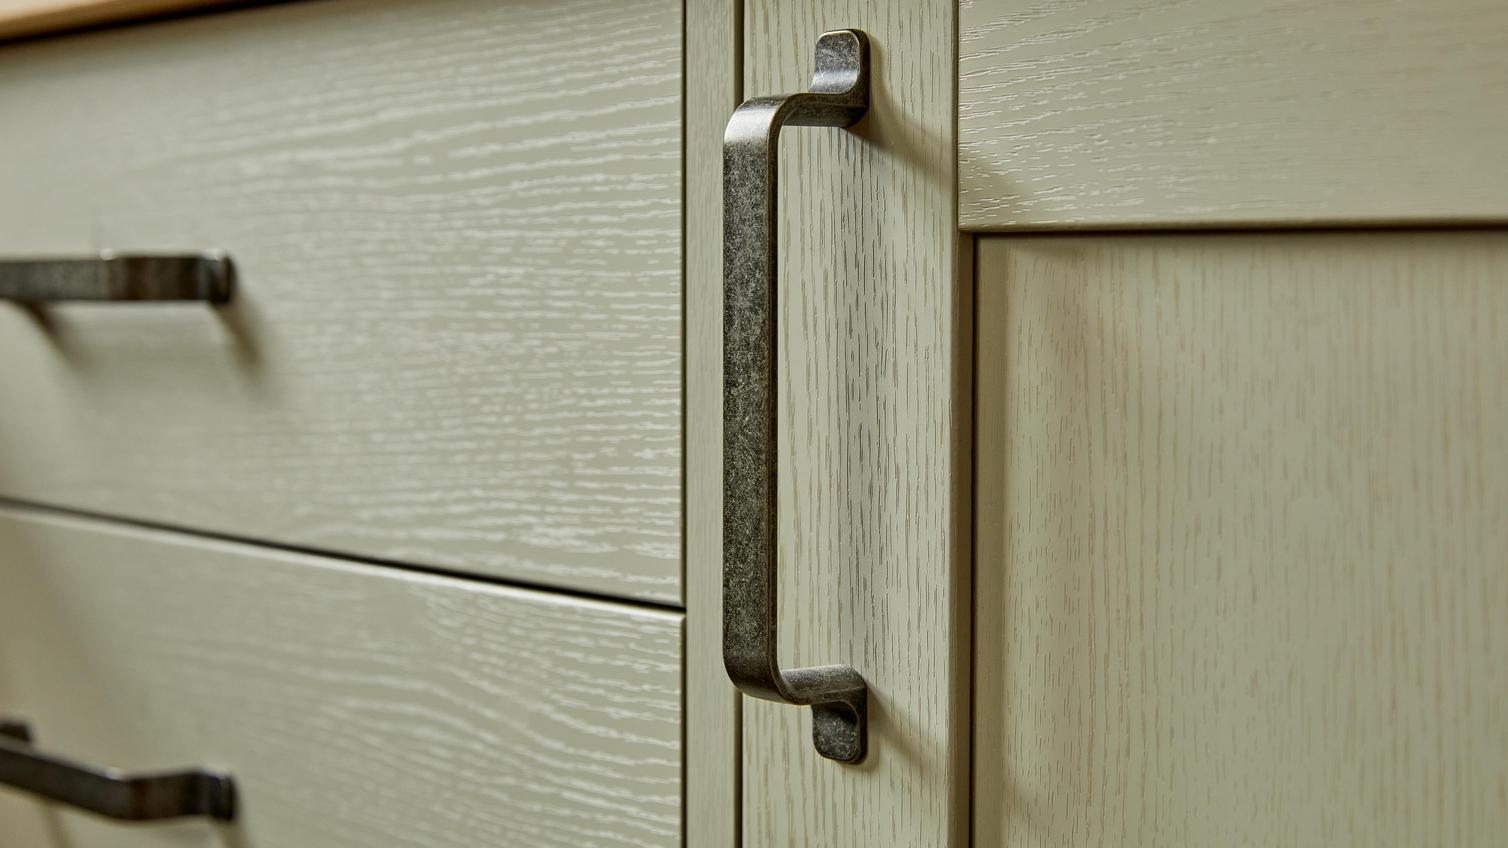 Black, D-shaped handle with a weathered finish fitted on sage-green, shaker doors for a traditional look.